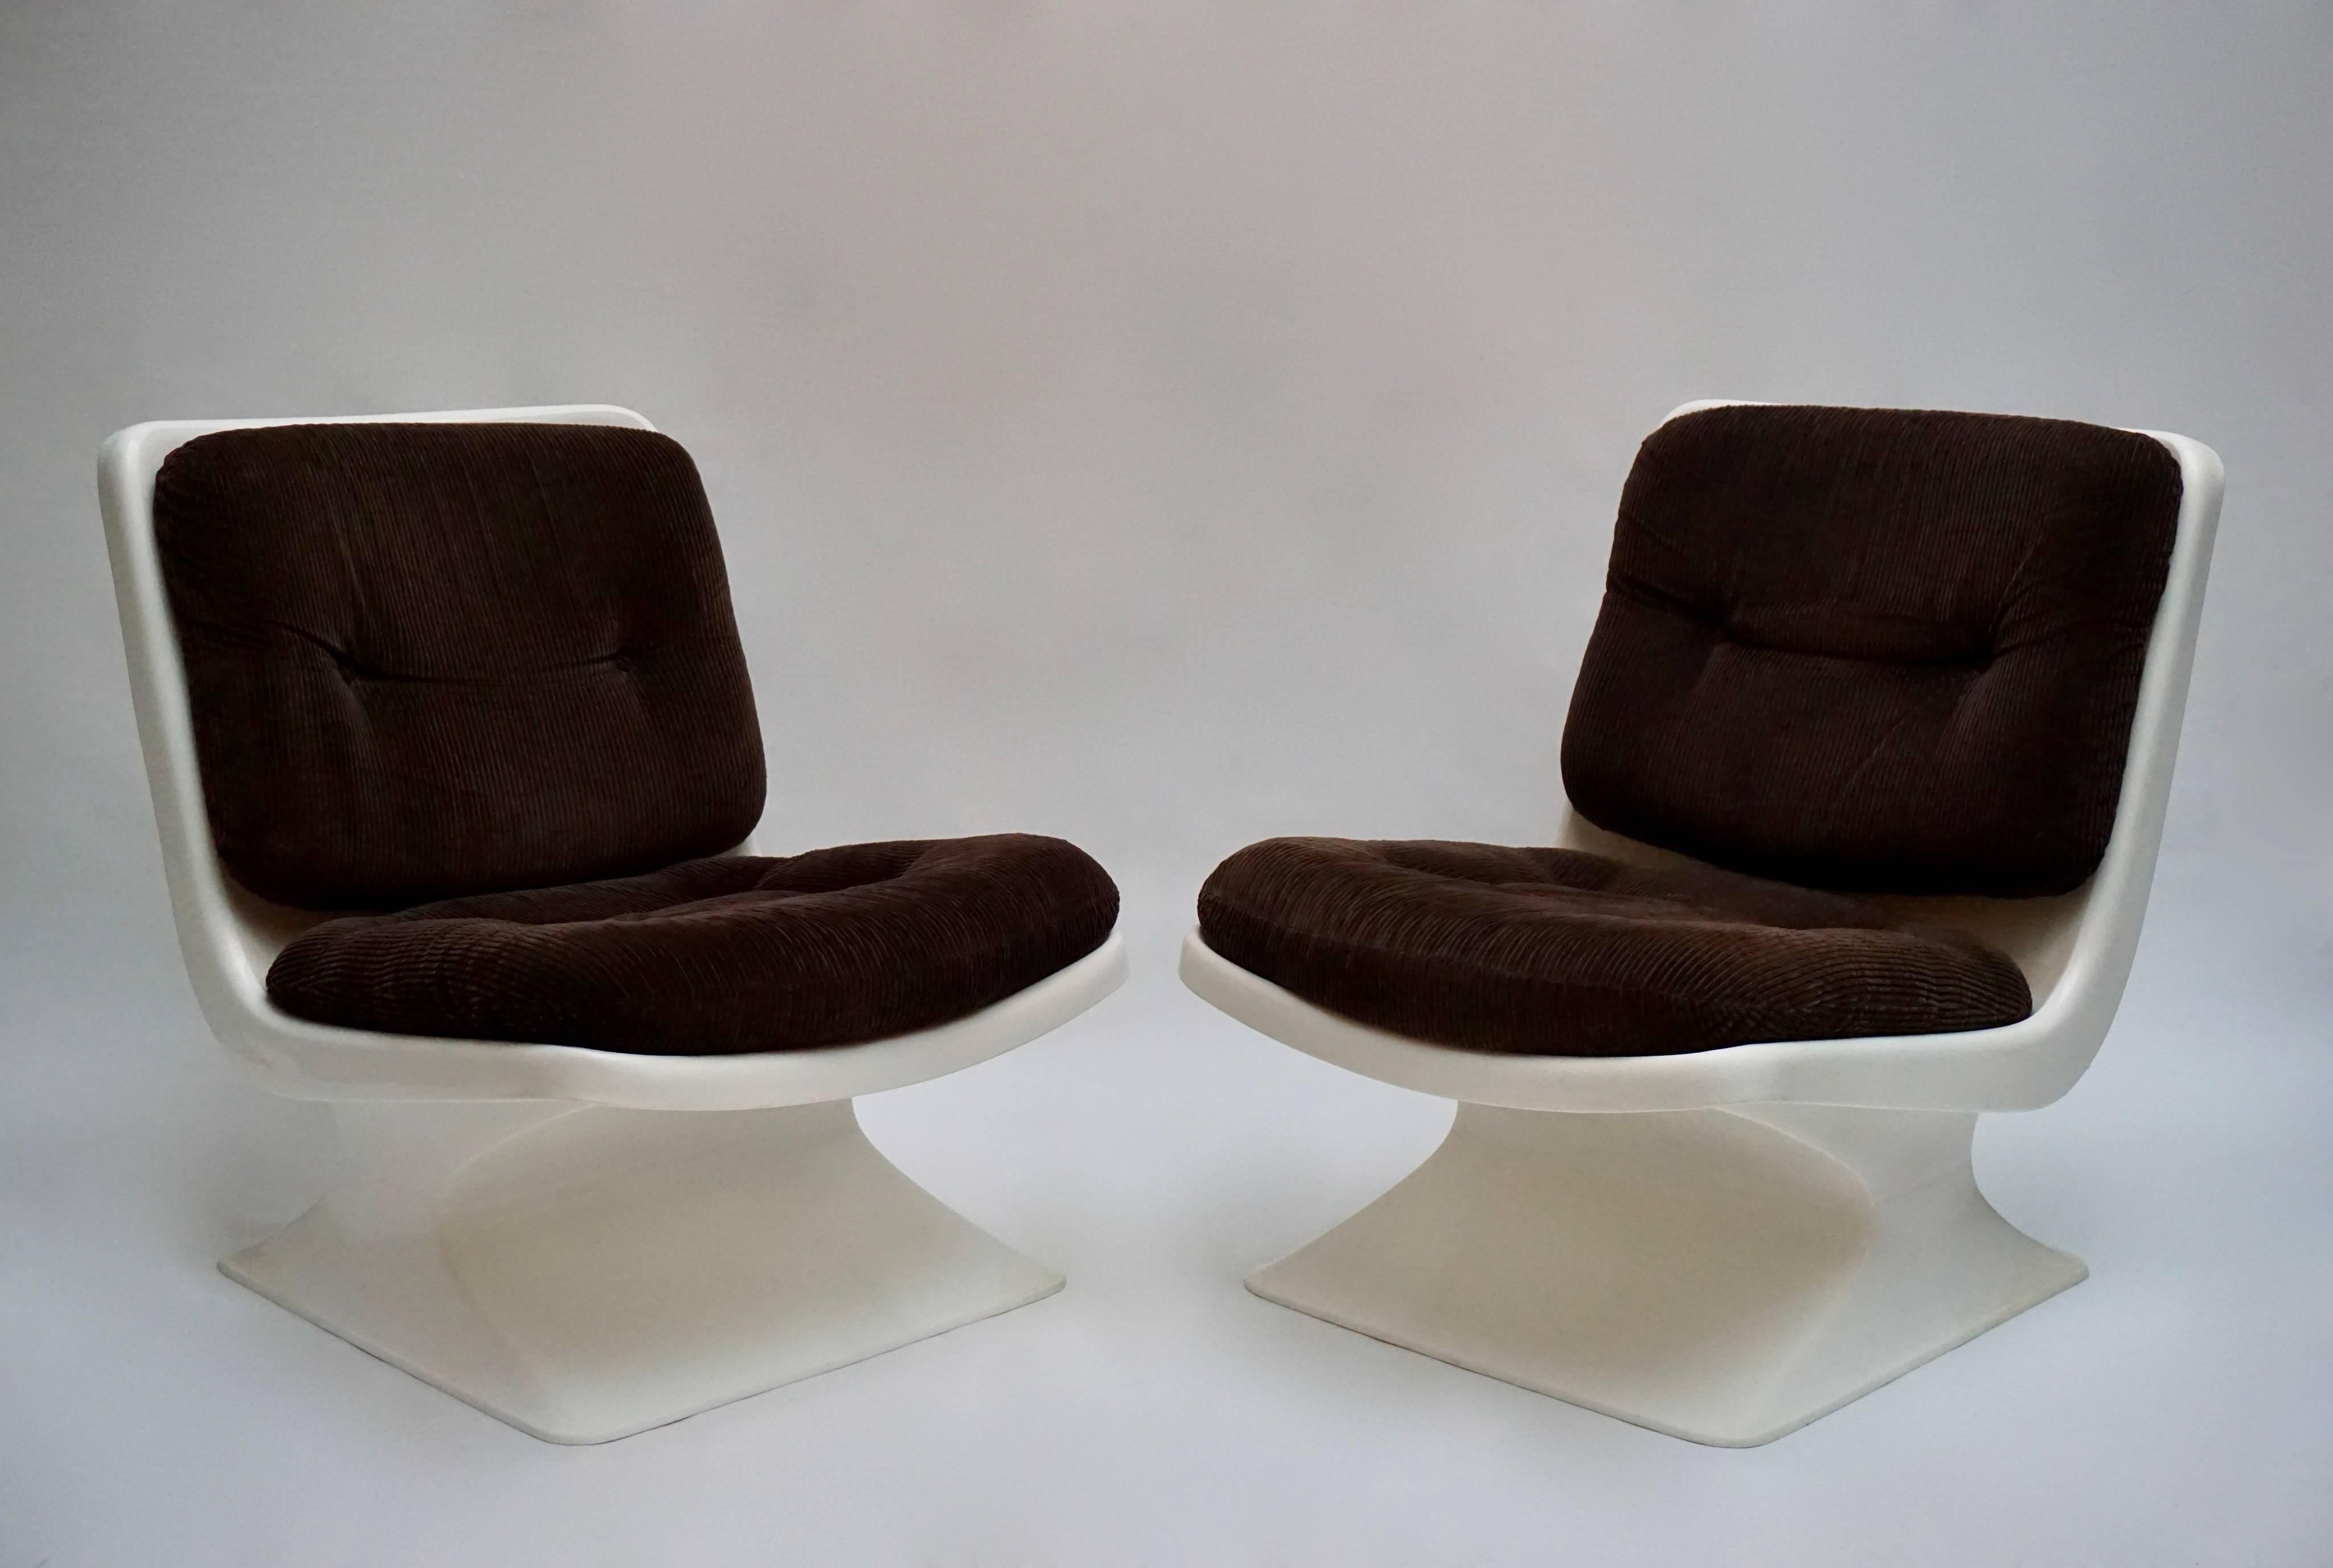 Beautiful and rare pair of lounge chairs edited by Grosfillex Designer Albert Jacob: Lounge chair (Seat height 38 cm) in ABS with cushions in brown woven fabric.